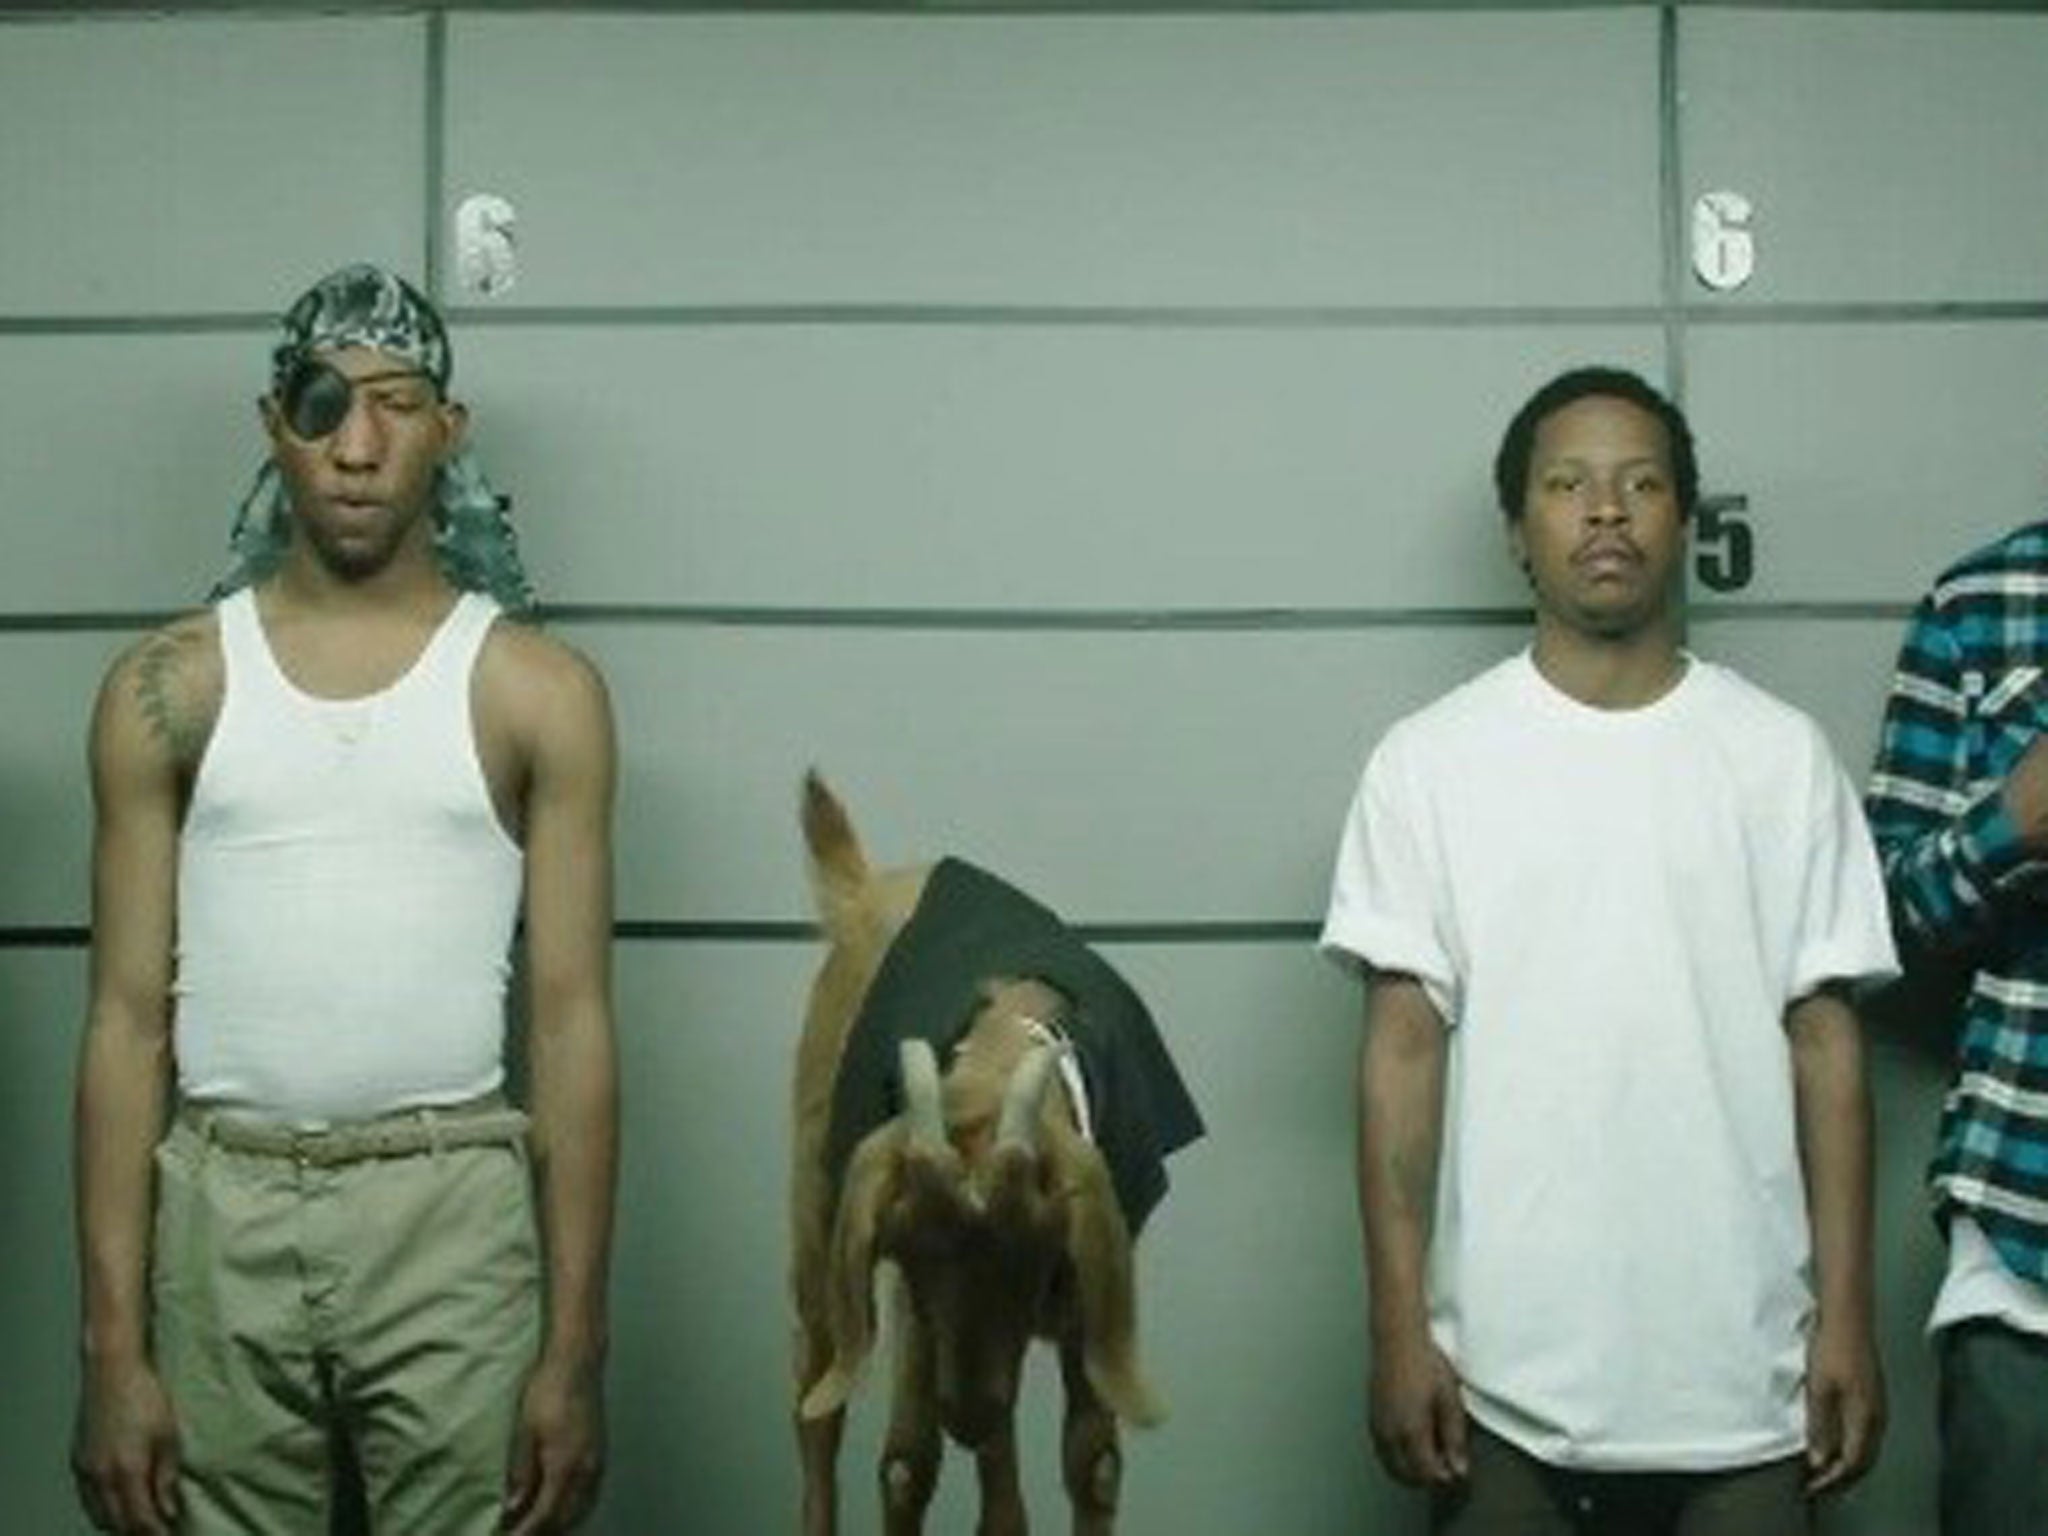 A still from the advert showing the line-up of suspects